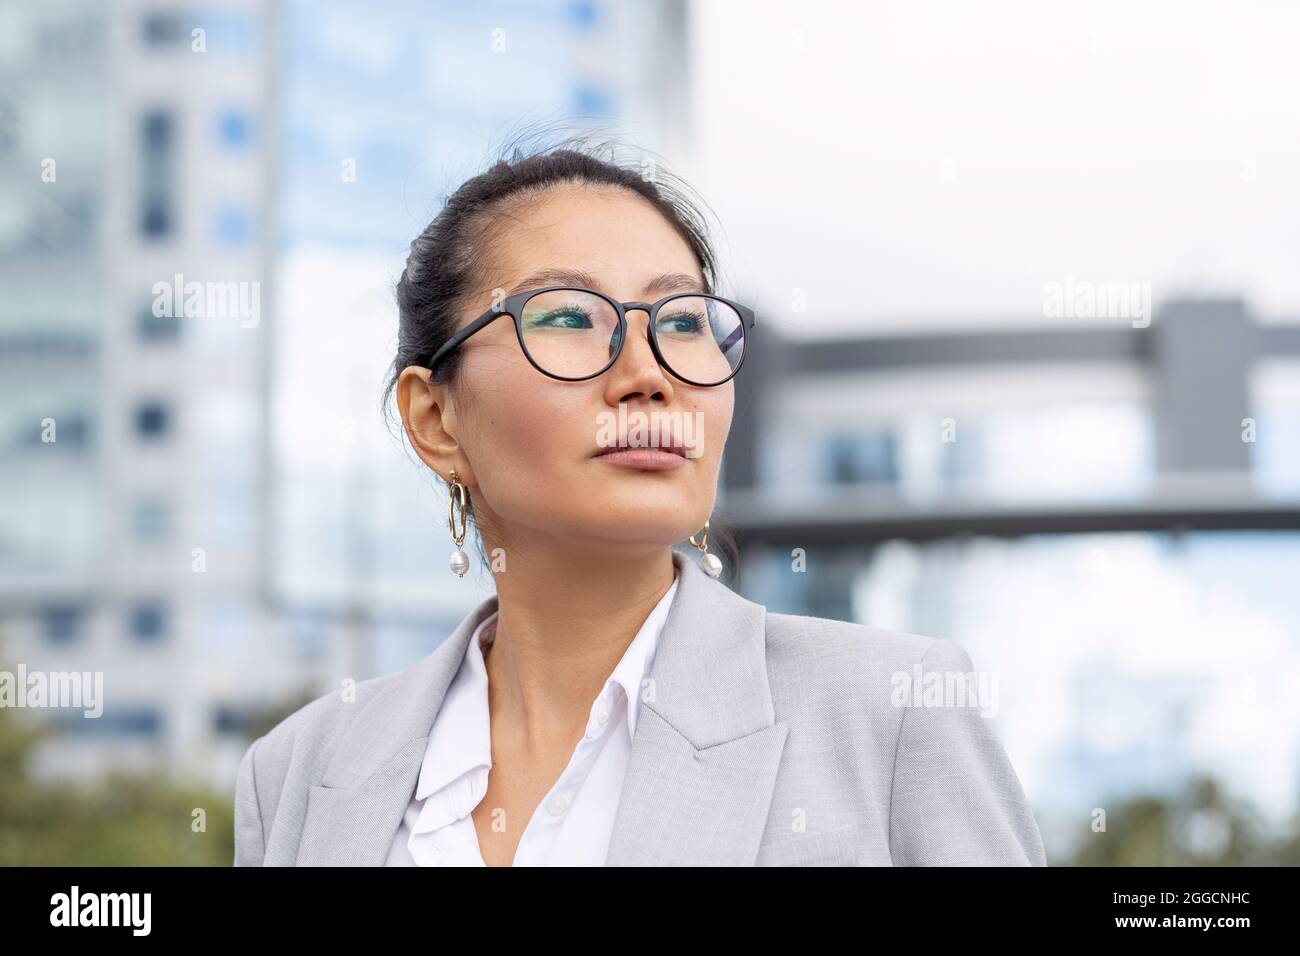 Young serious businesswoman of Asian ethnicity standing against modern architecture in urban environment Stock Photo